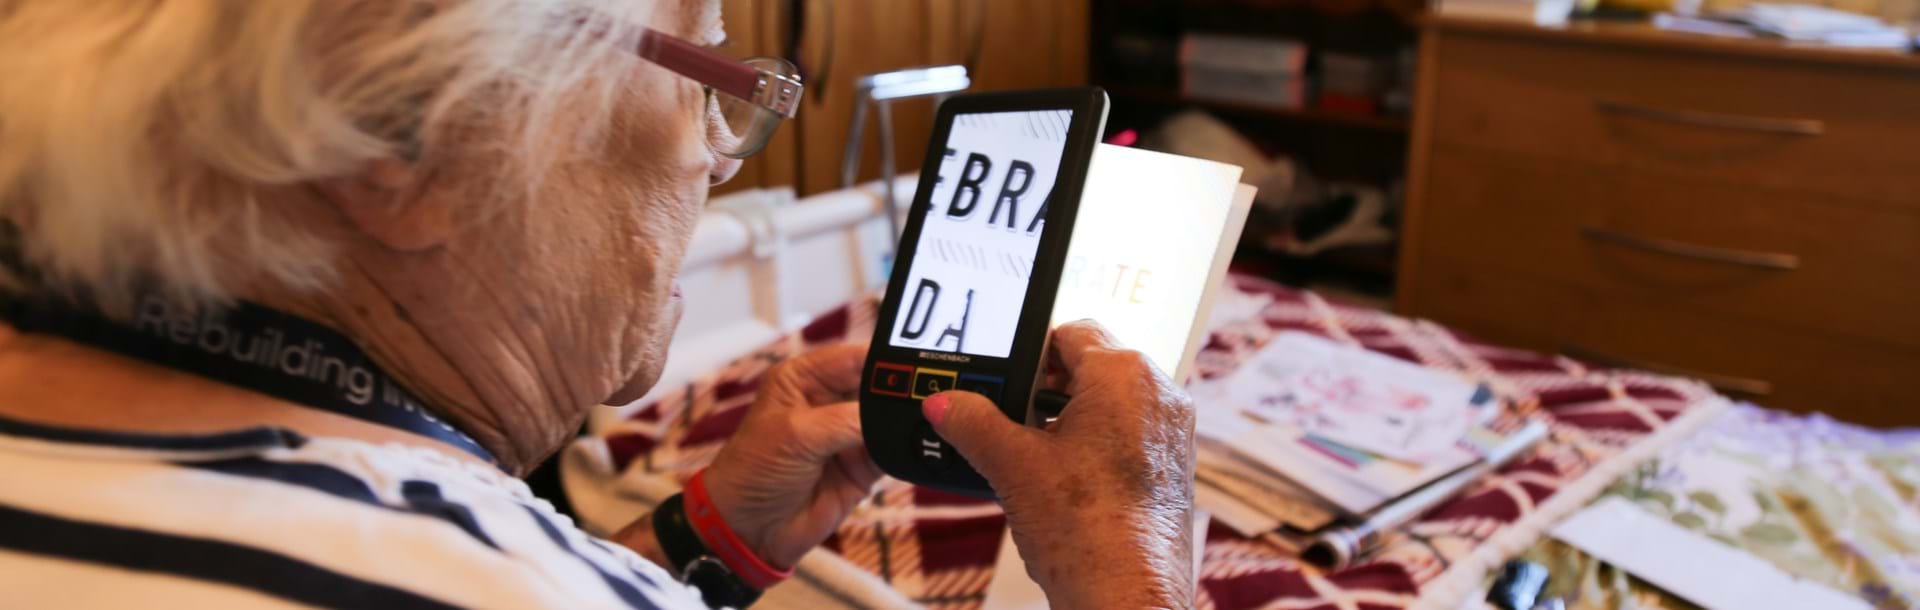 Blind veteran Win using a handheld electronic magnifier to read text on a card